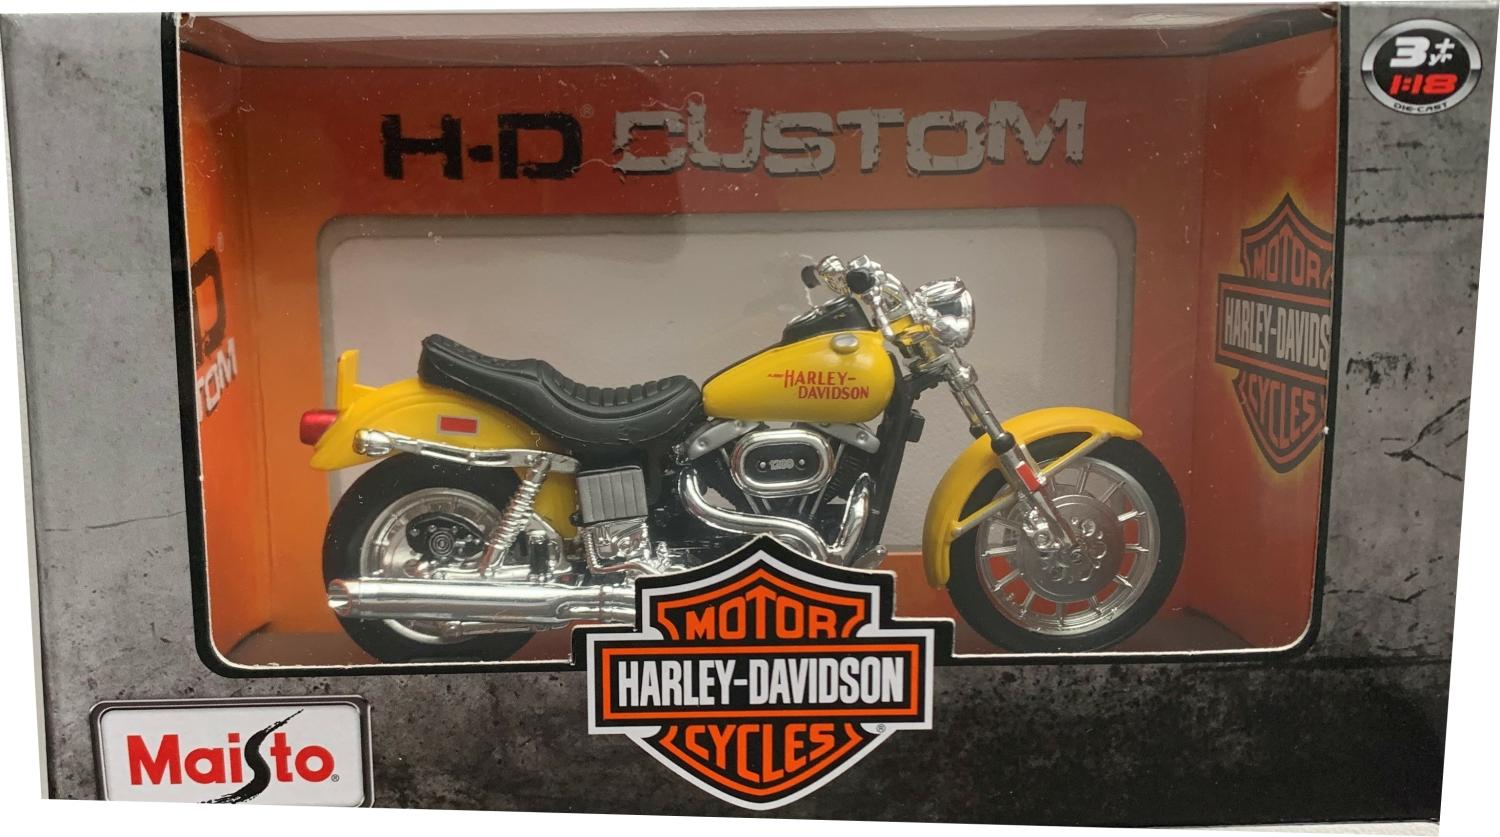 Harley Davidson 1977 FXS Low Rider in yellow 1:18 scale model from Maisto